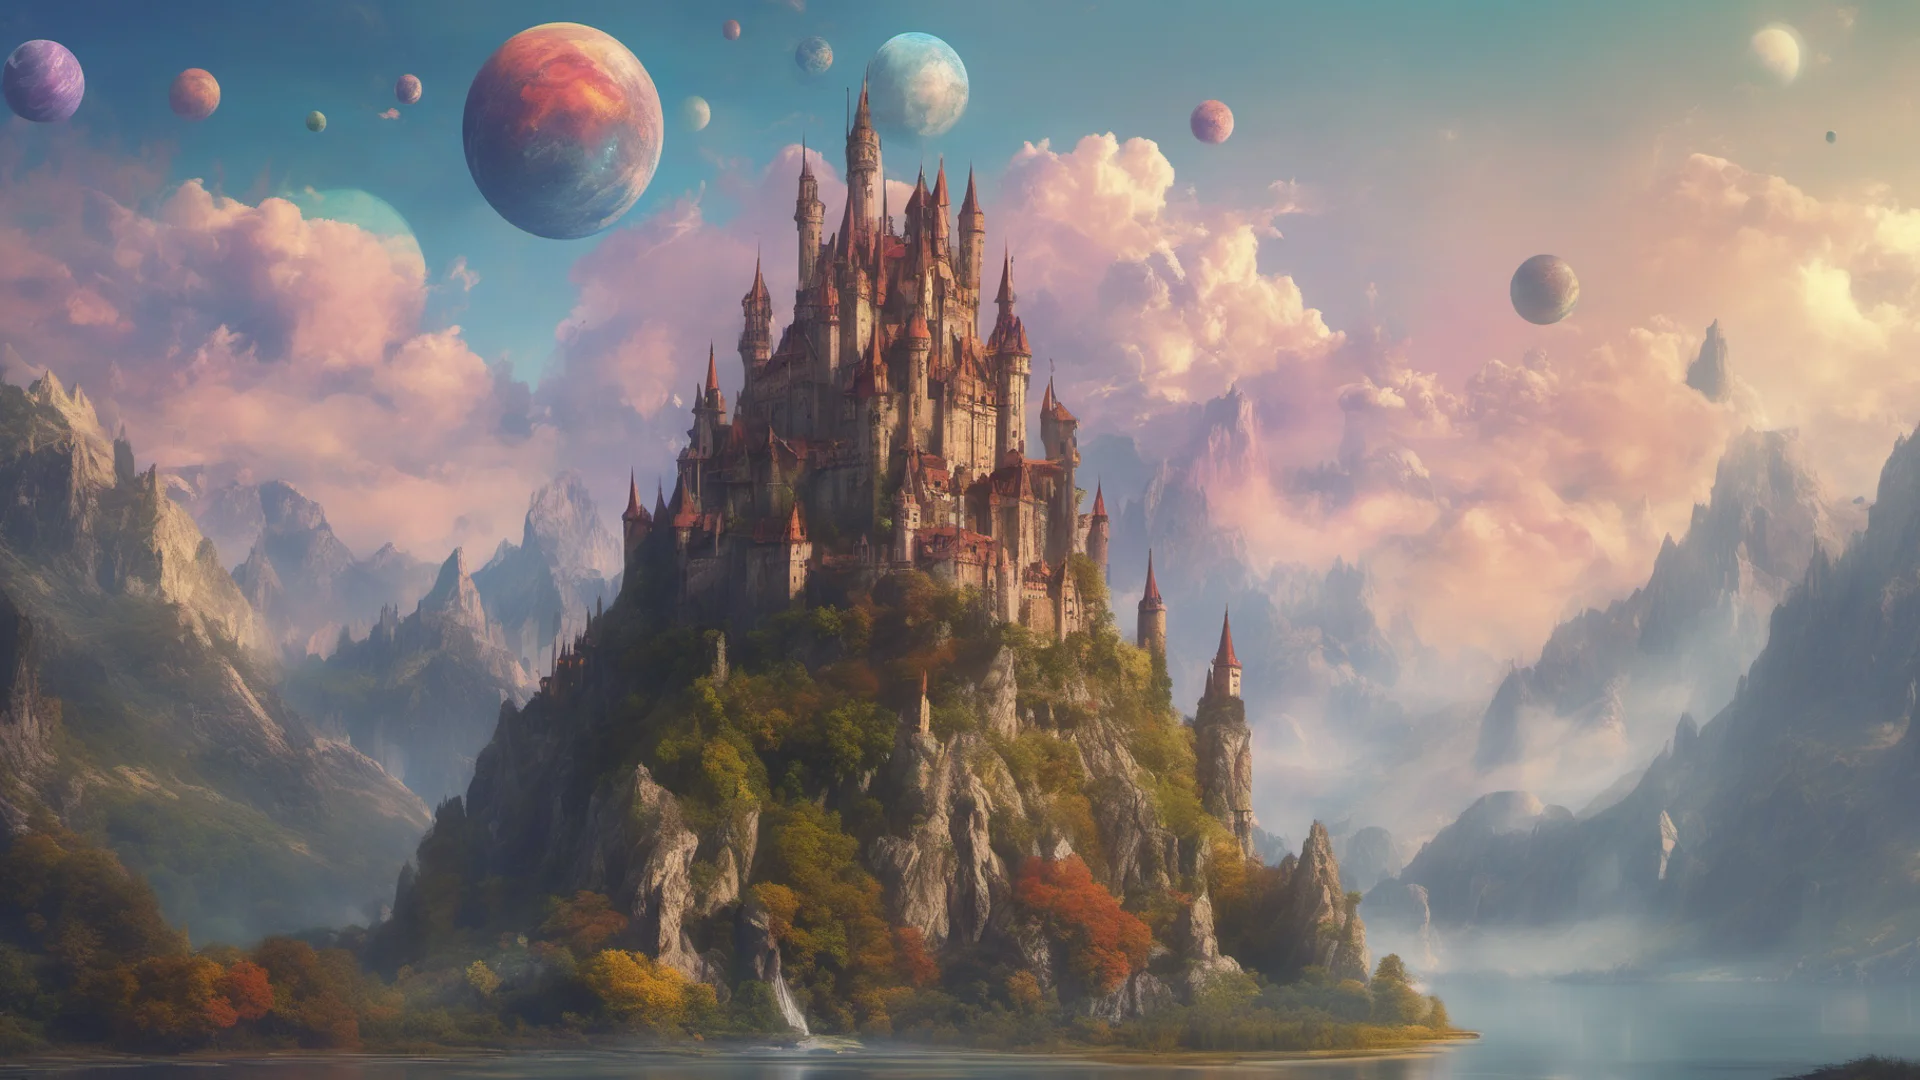 epic fantasy environment castle on tall mountain lakes sky with many colorful planets   good looking trending fantastic 1 wide